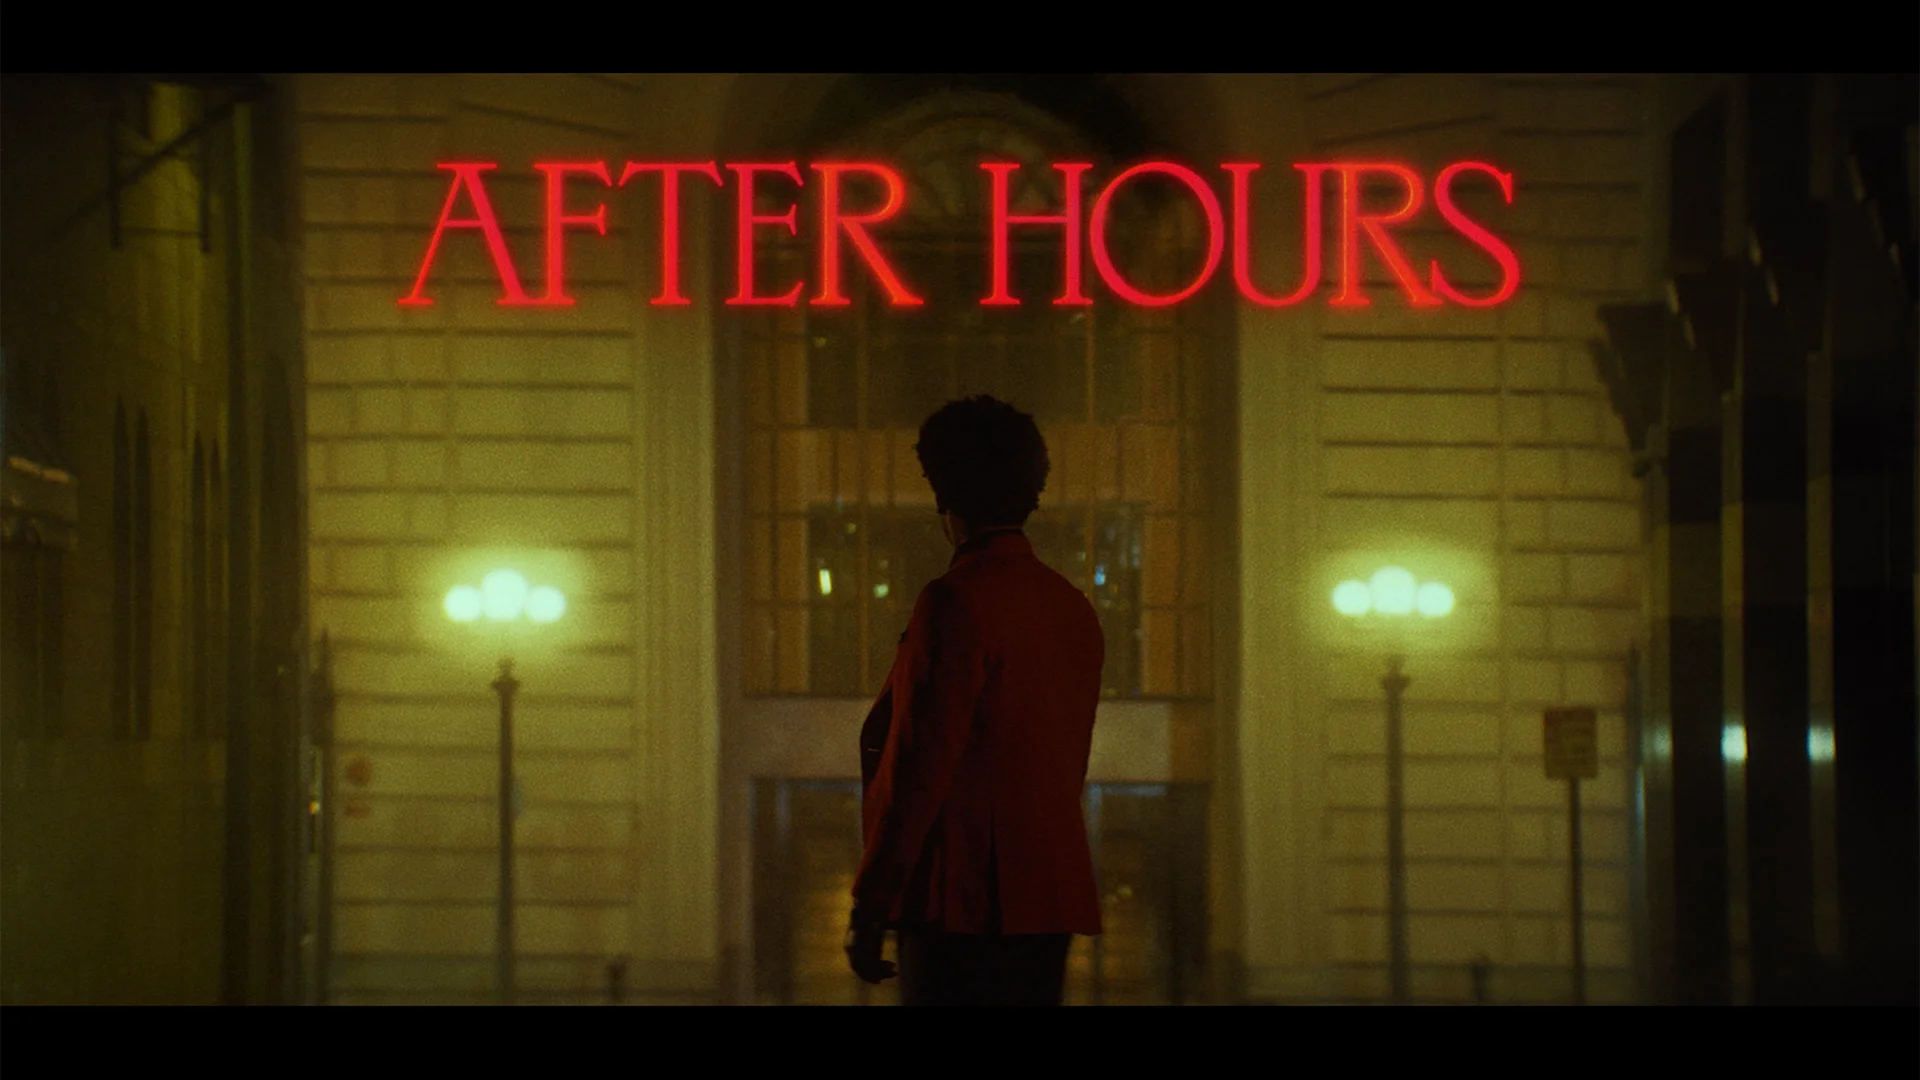 The Weeknd - After Hours (Official Video) on Vimeo